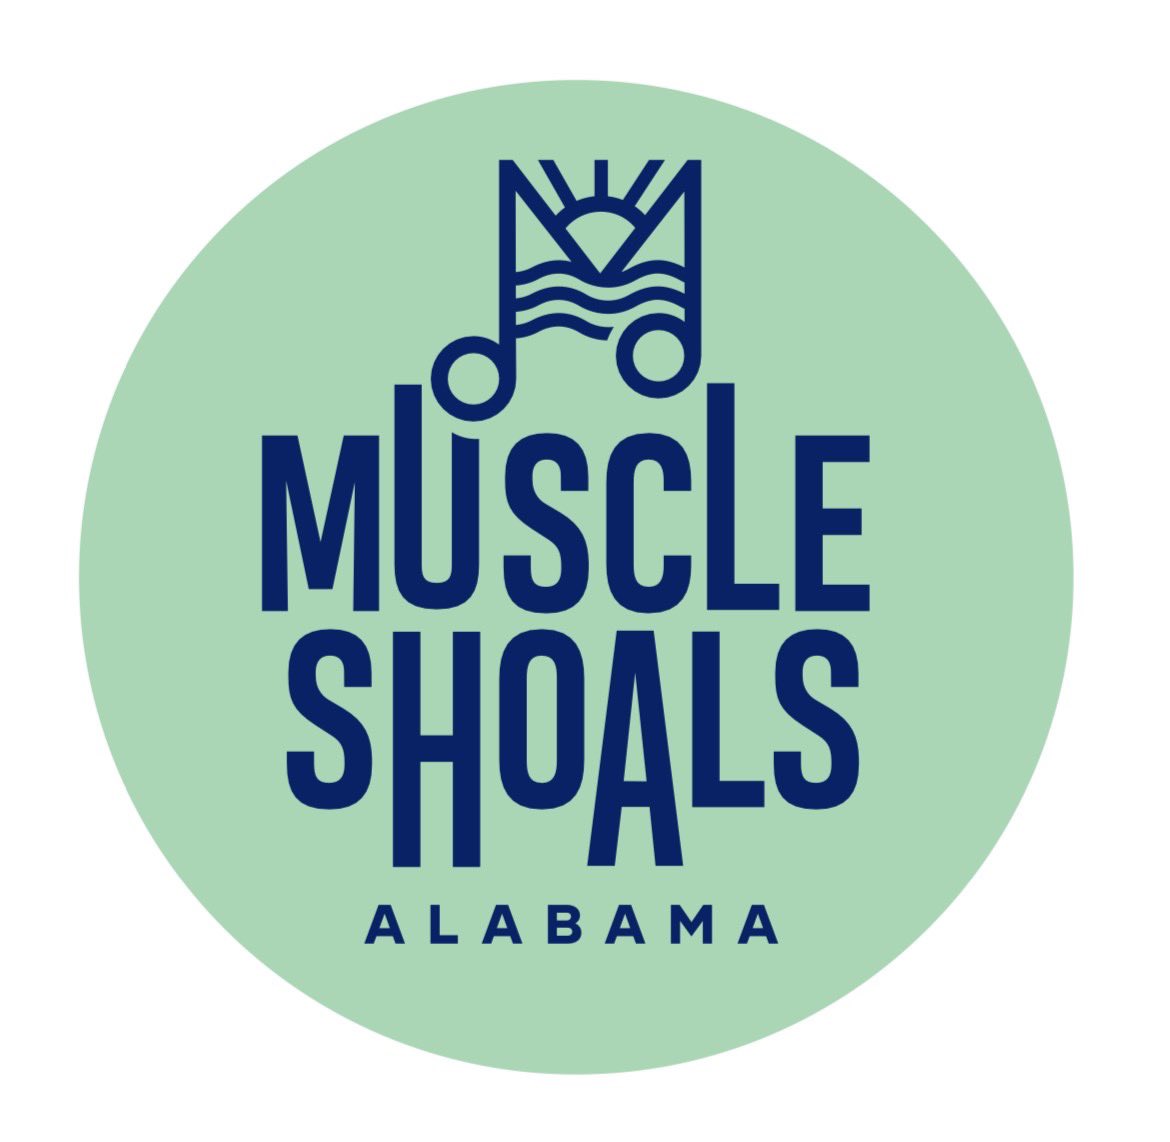 Today is our… BIRTHDAY🎉 Comment your favorite thing about Muscle Shoals in honor of our incorporation 101 years ago!
•
#cityofmuscleshoals #dayofincorporation